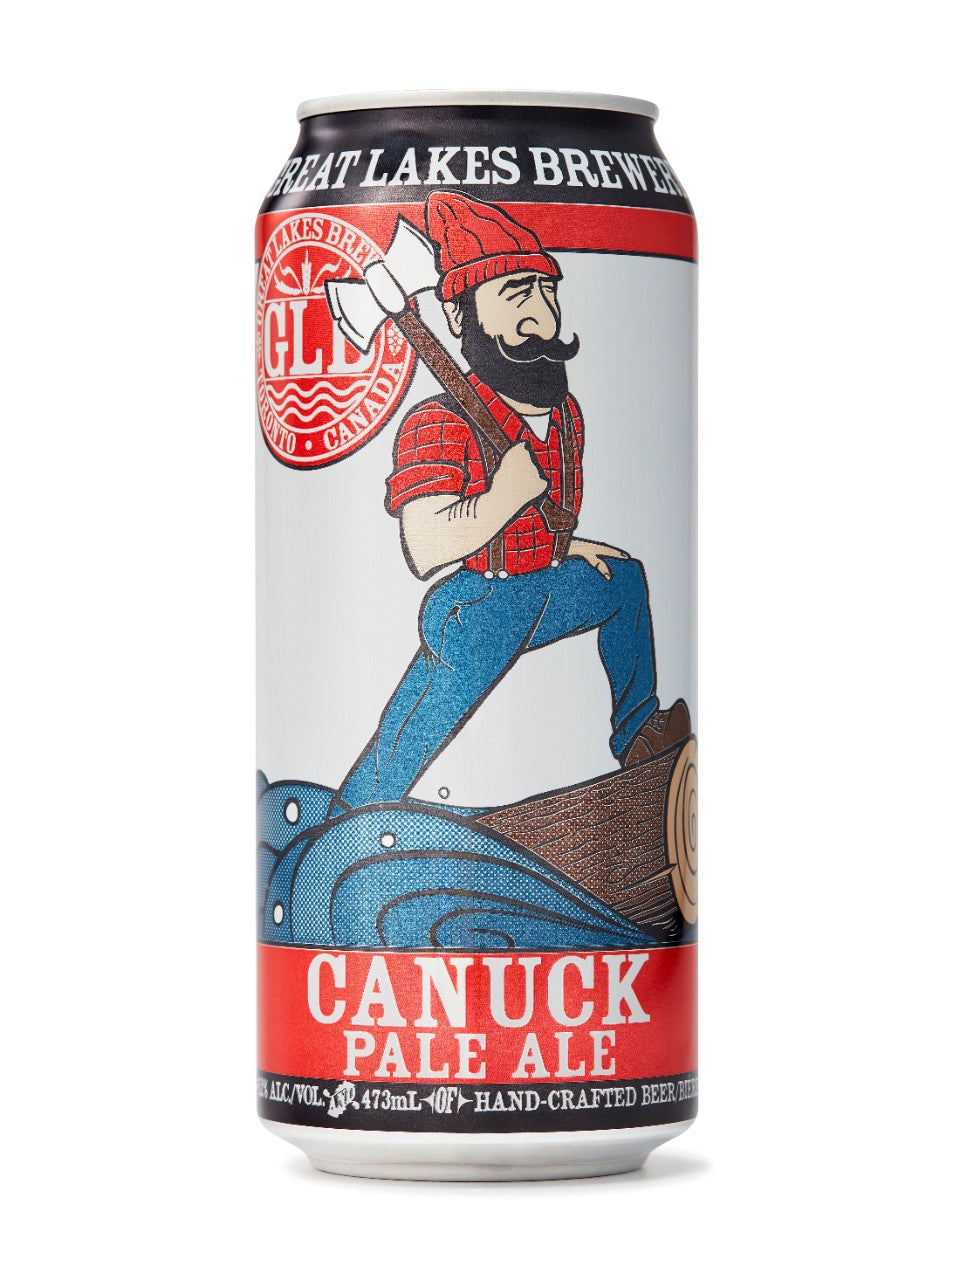 Great Lakes Brewery Canuck Pale Ale 473 mL can